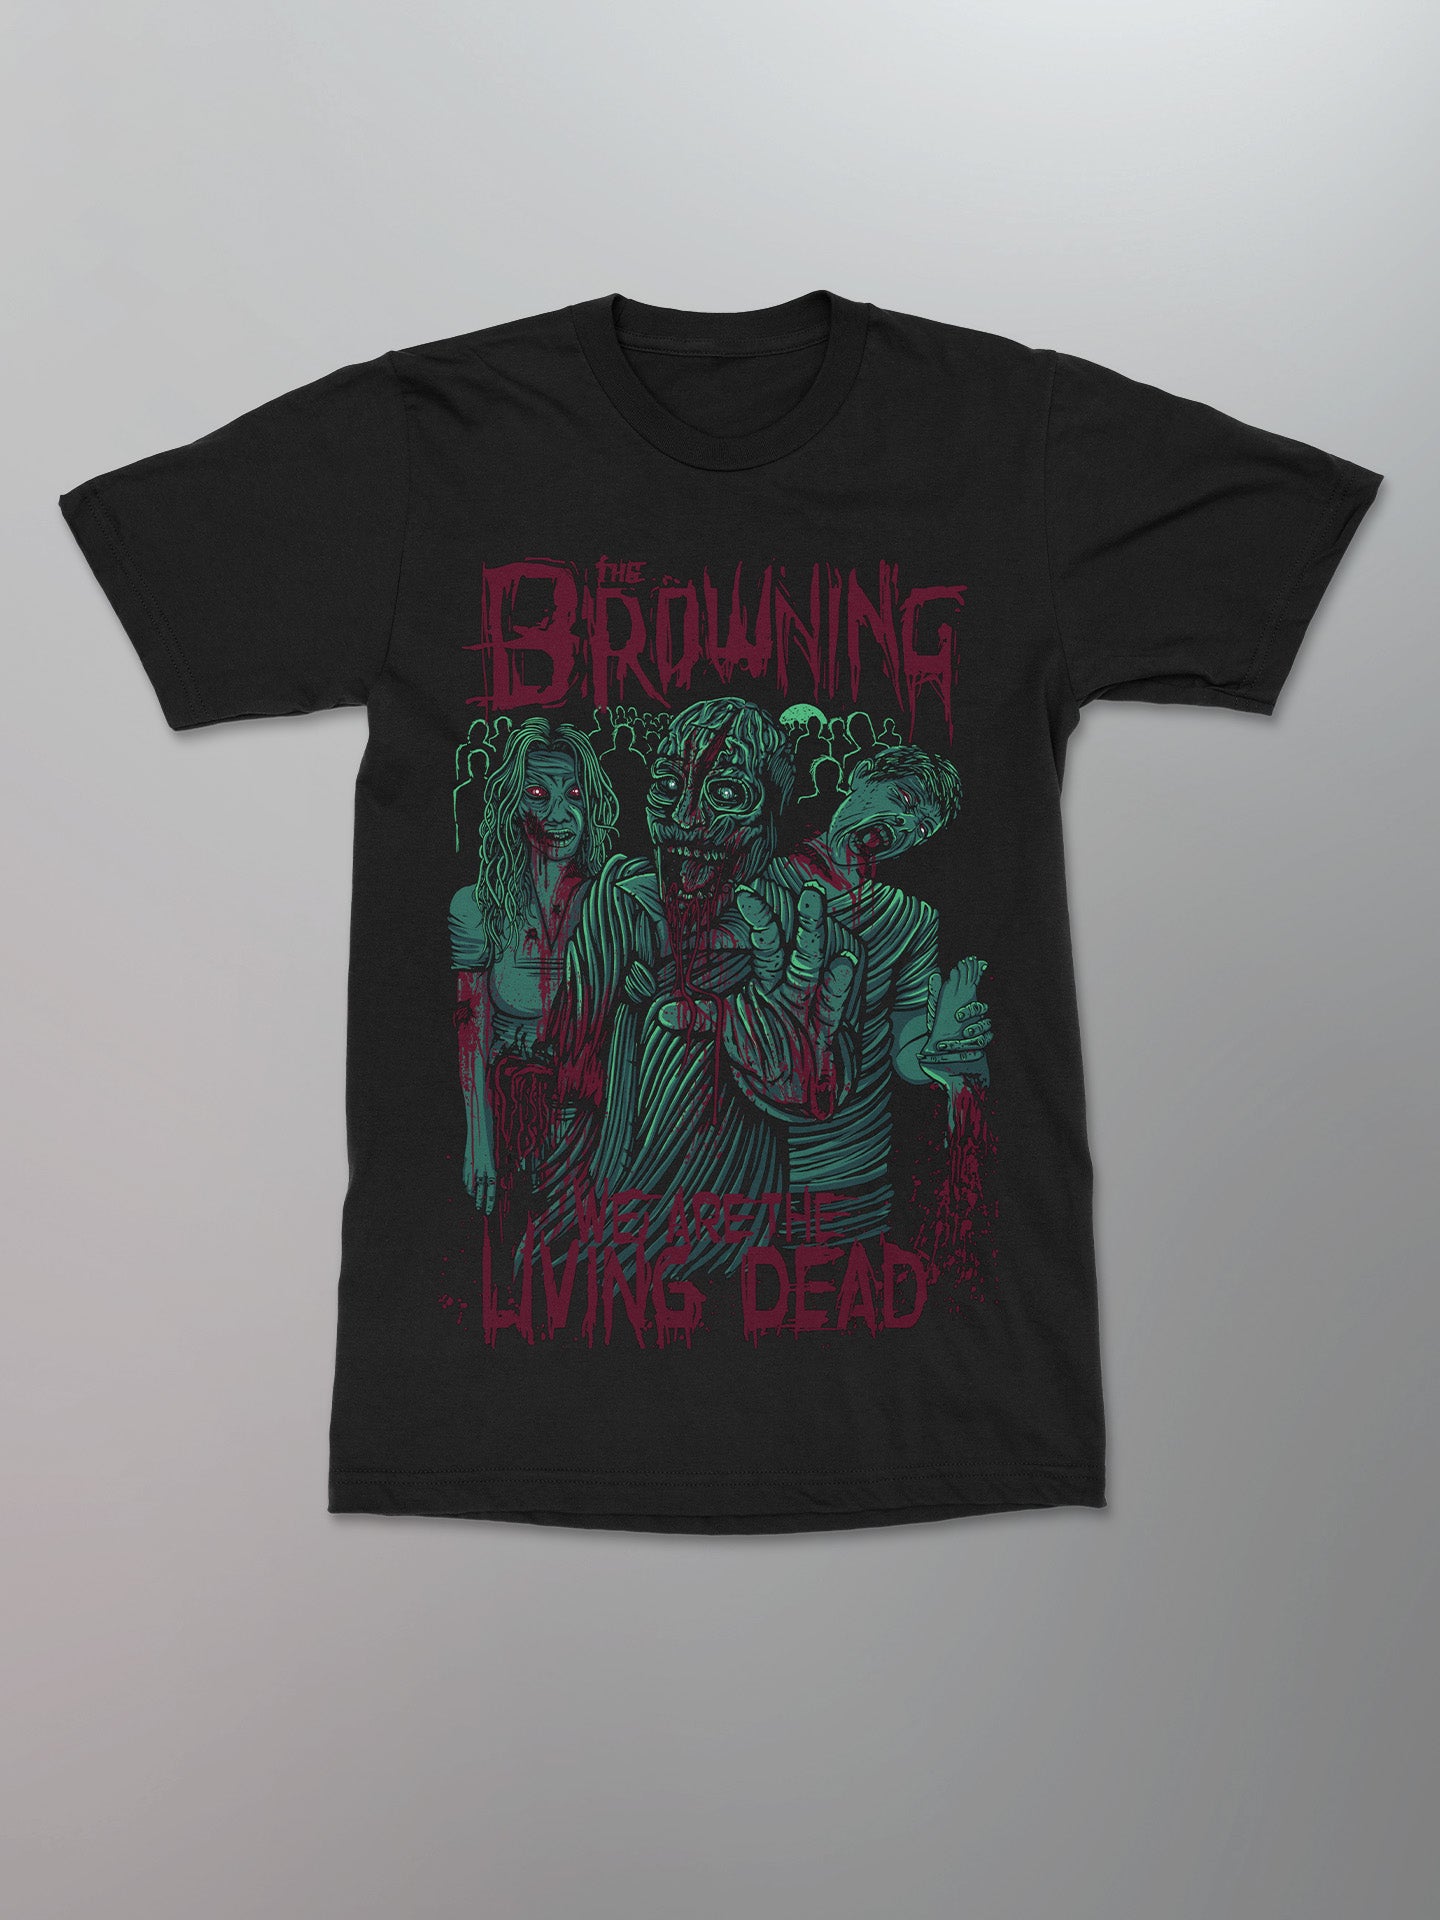 The Browning - Living Dead Shirt